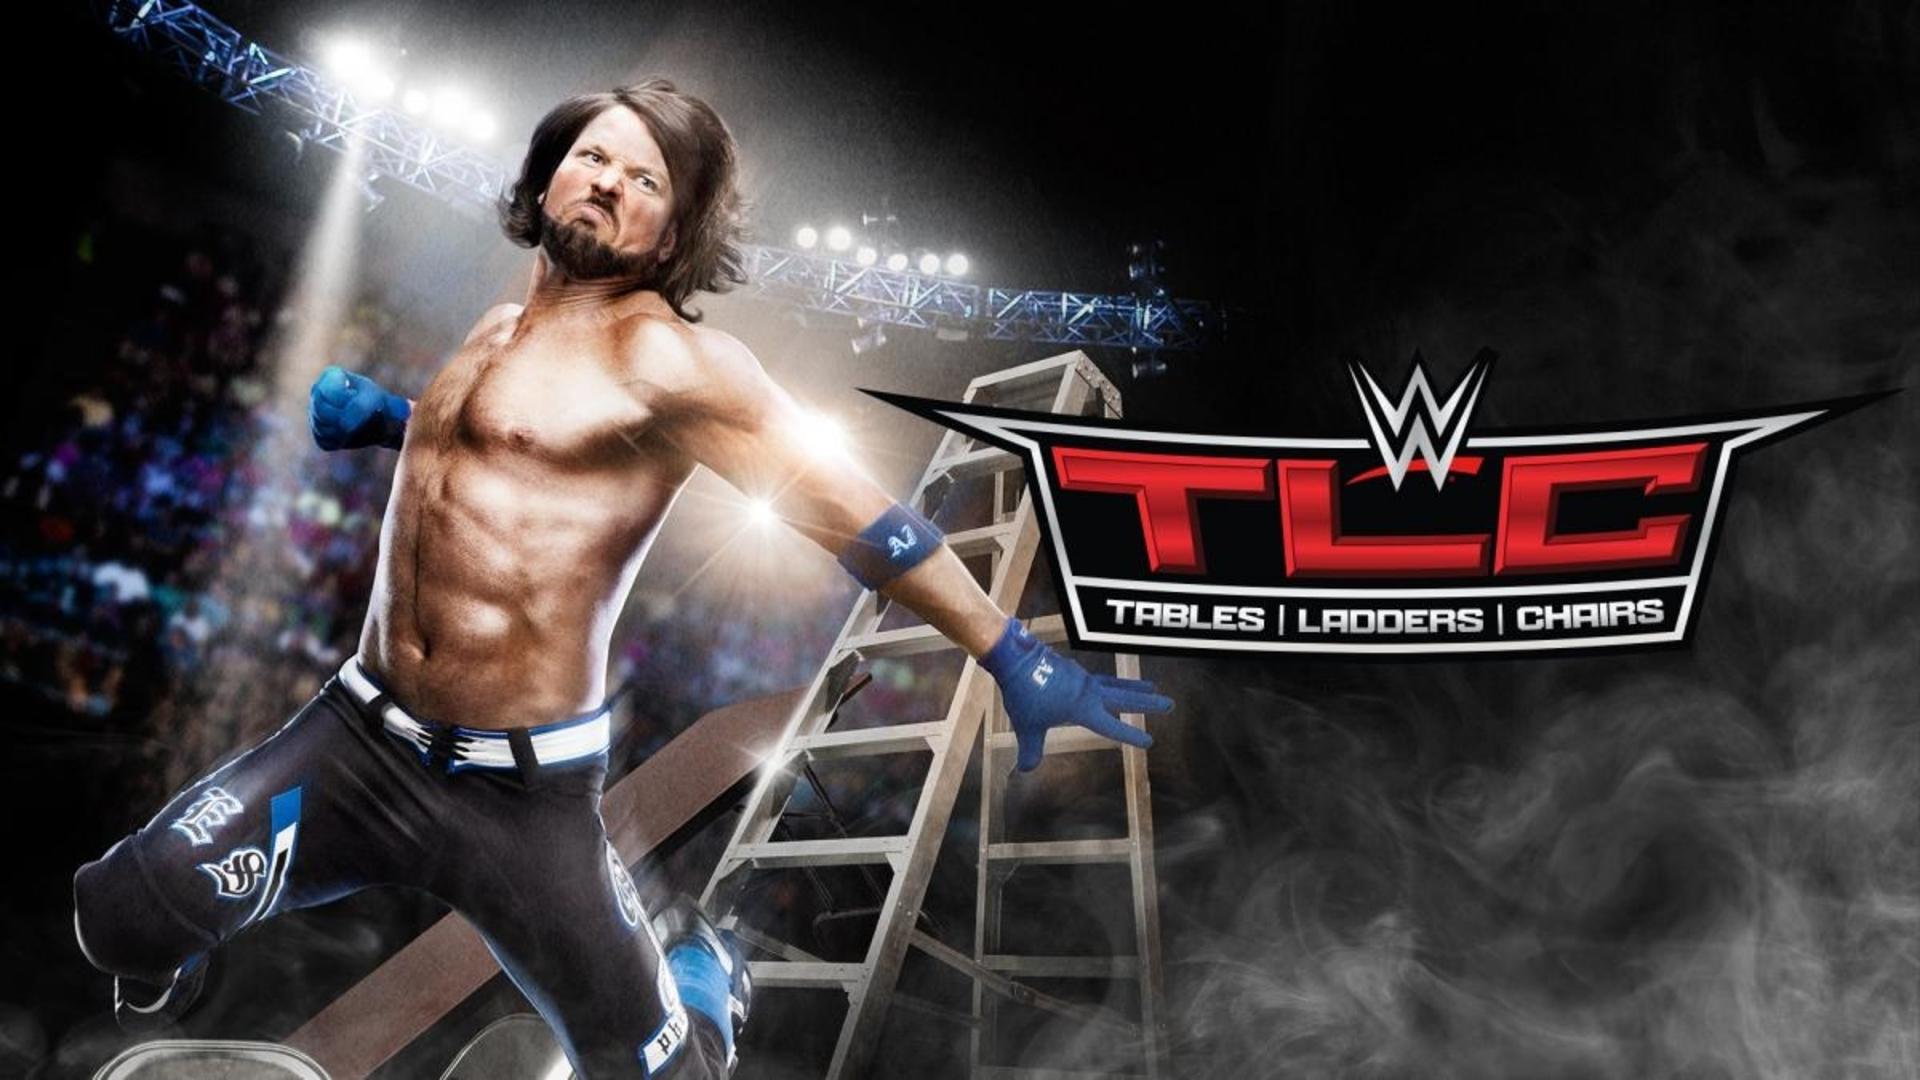 WWE TLC - Tables, Ladders & Chairs 2016